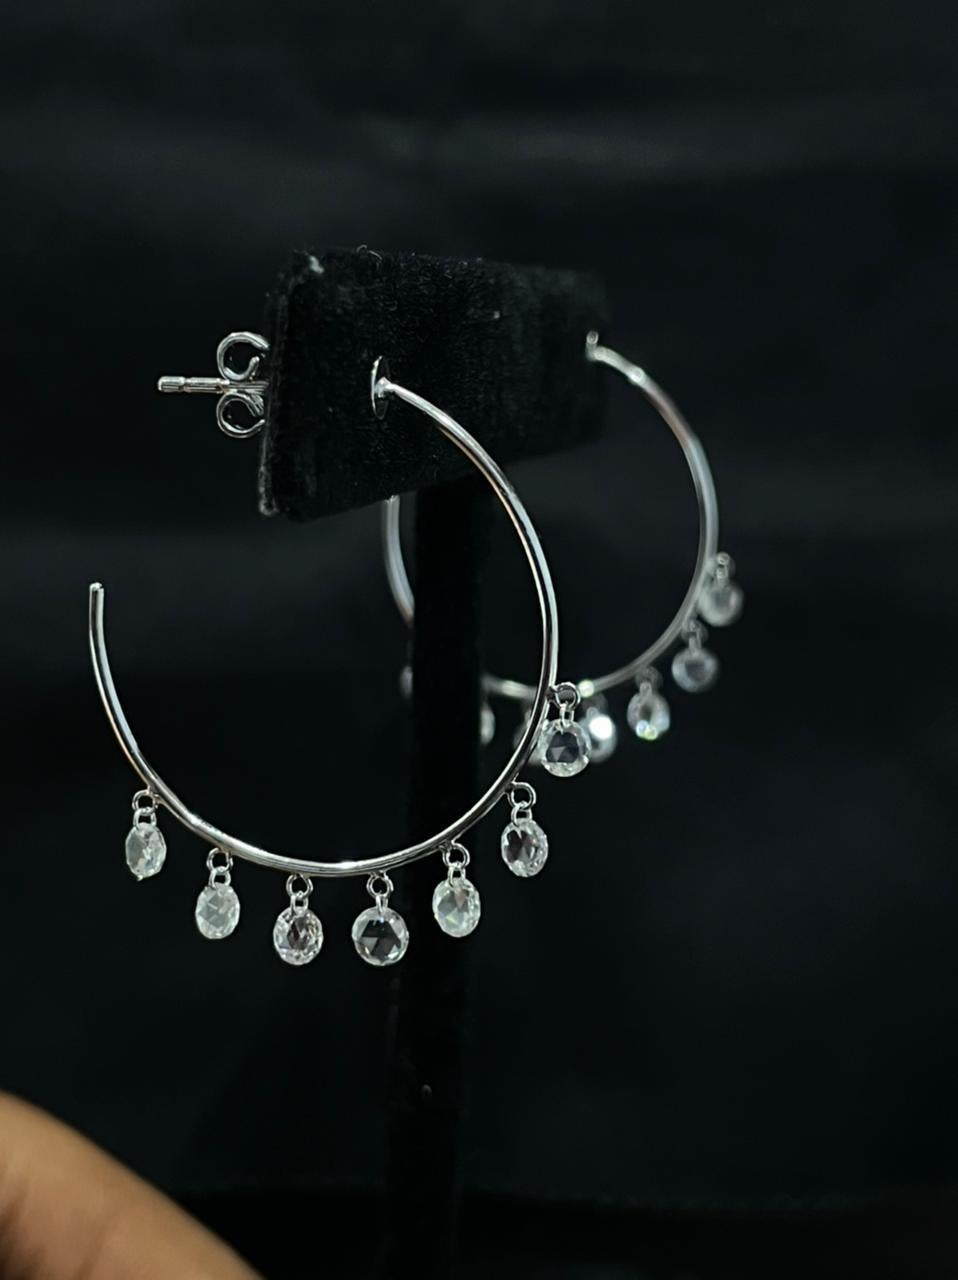 PANIM Diamond Rosecut 18k White Gold Hoop Earrings

Elevate your attire and make a statement with the sparkling diamond hoop earrings to boost your everyday look. Up your hoop game by adding pendants and make it truly personal. Set in 18ct white